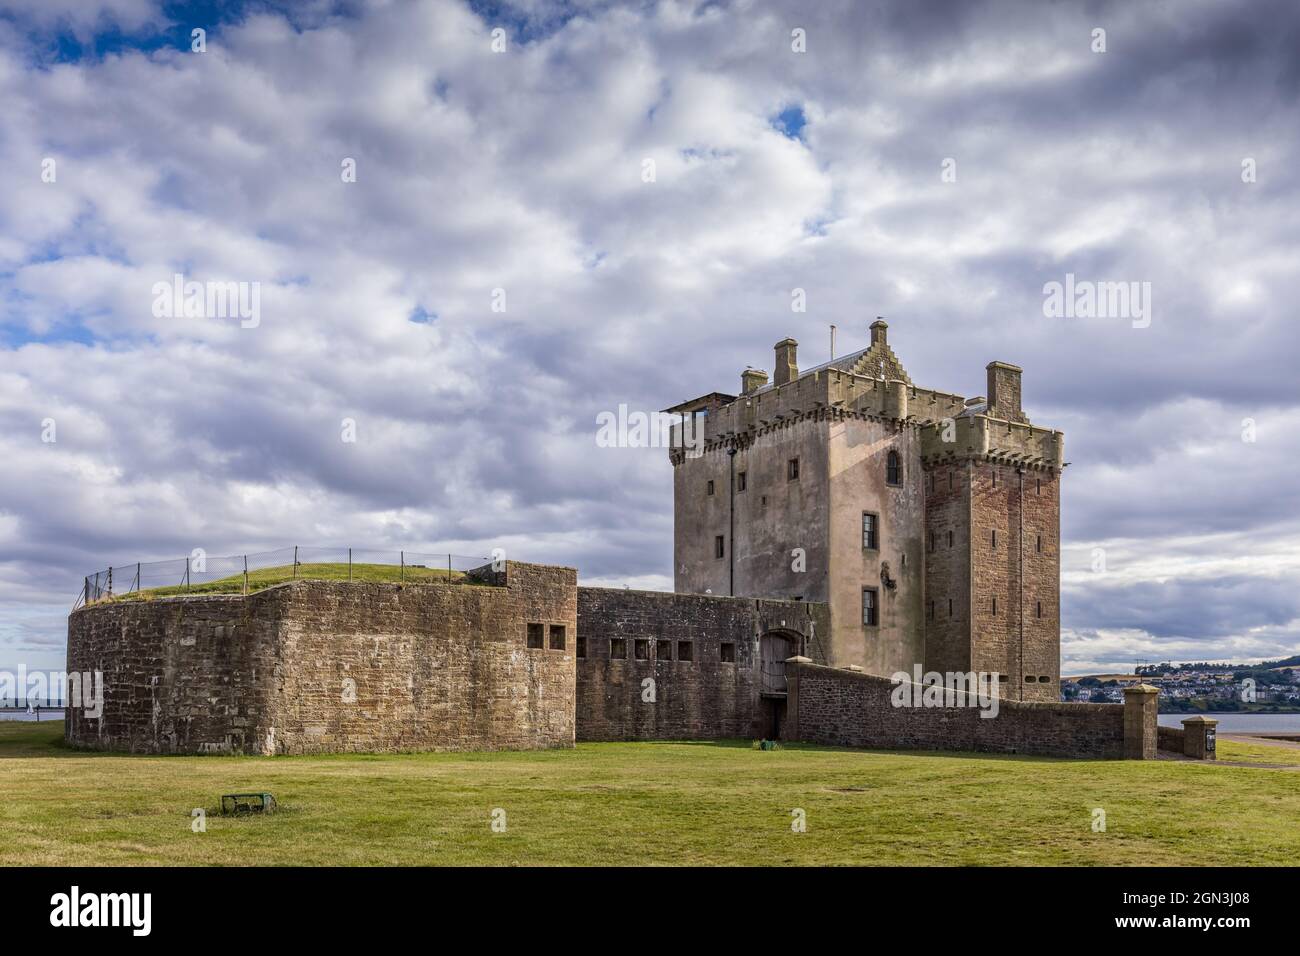 Broughty Castle is a historic castle on the banks of the river Tay in Broughty Ferry, Dundee, Scotland. Stock Photo